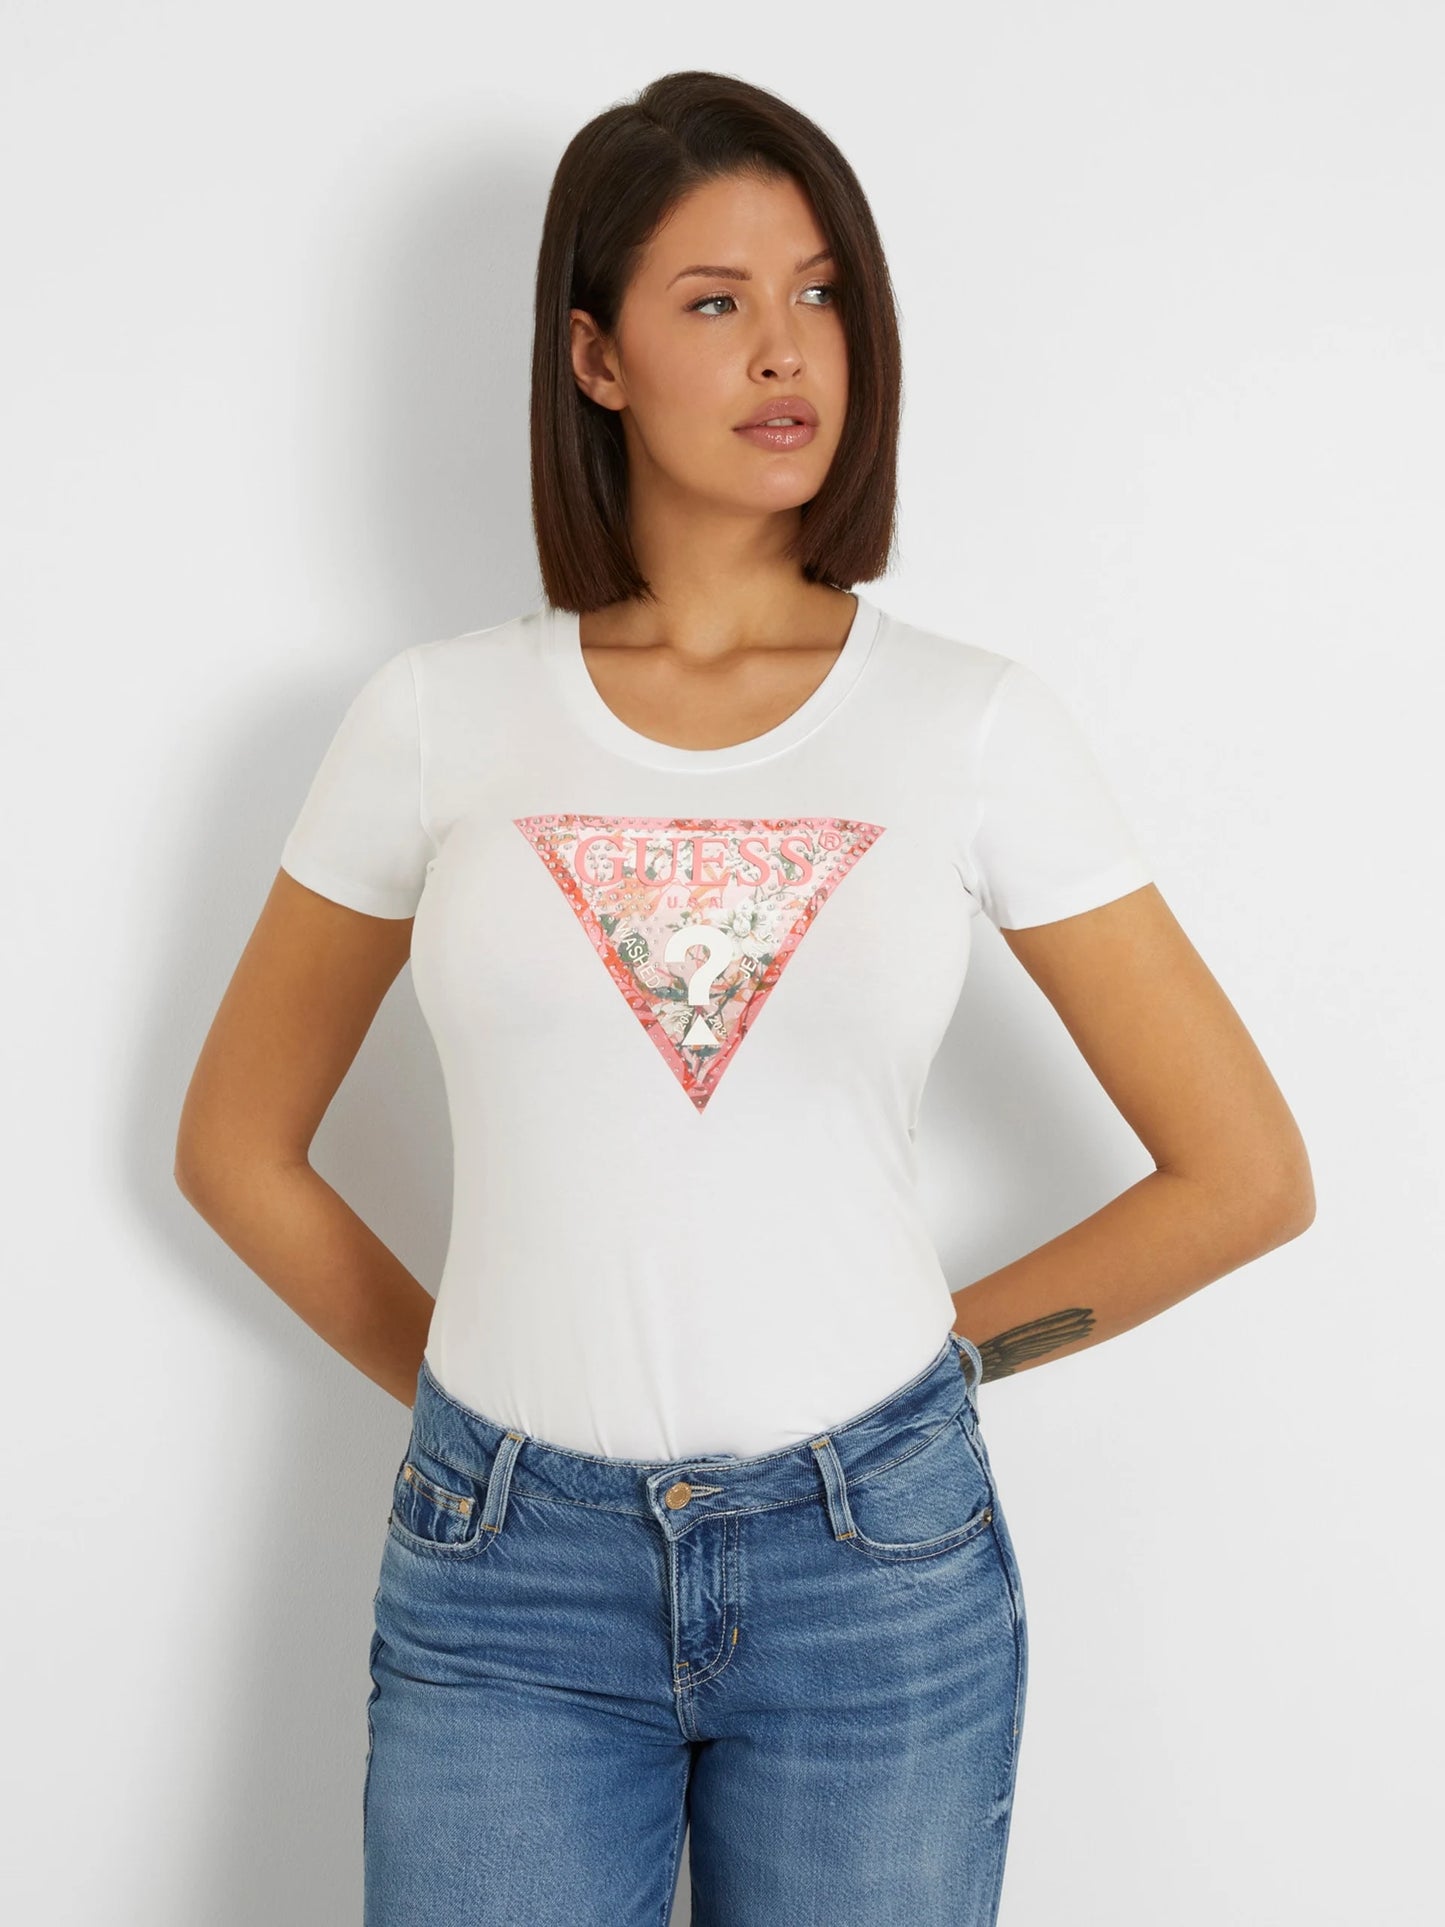 Guess Flower Triangle Tee - White